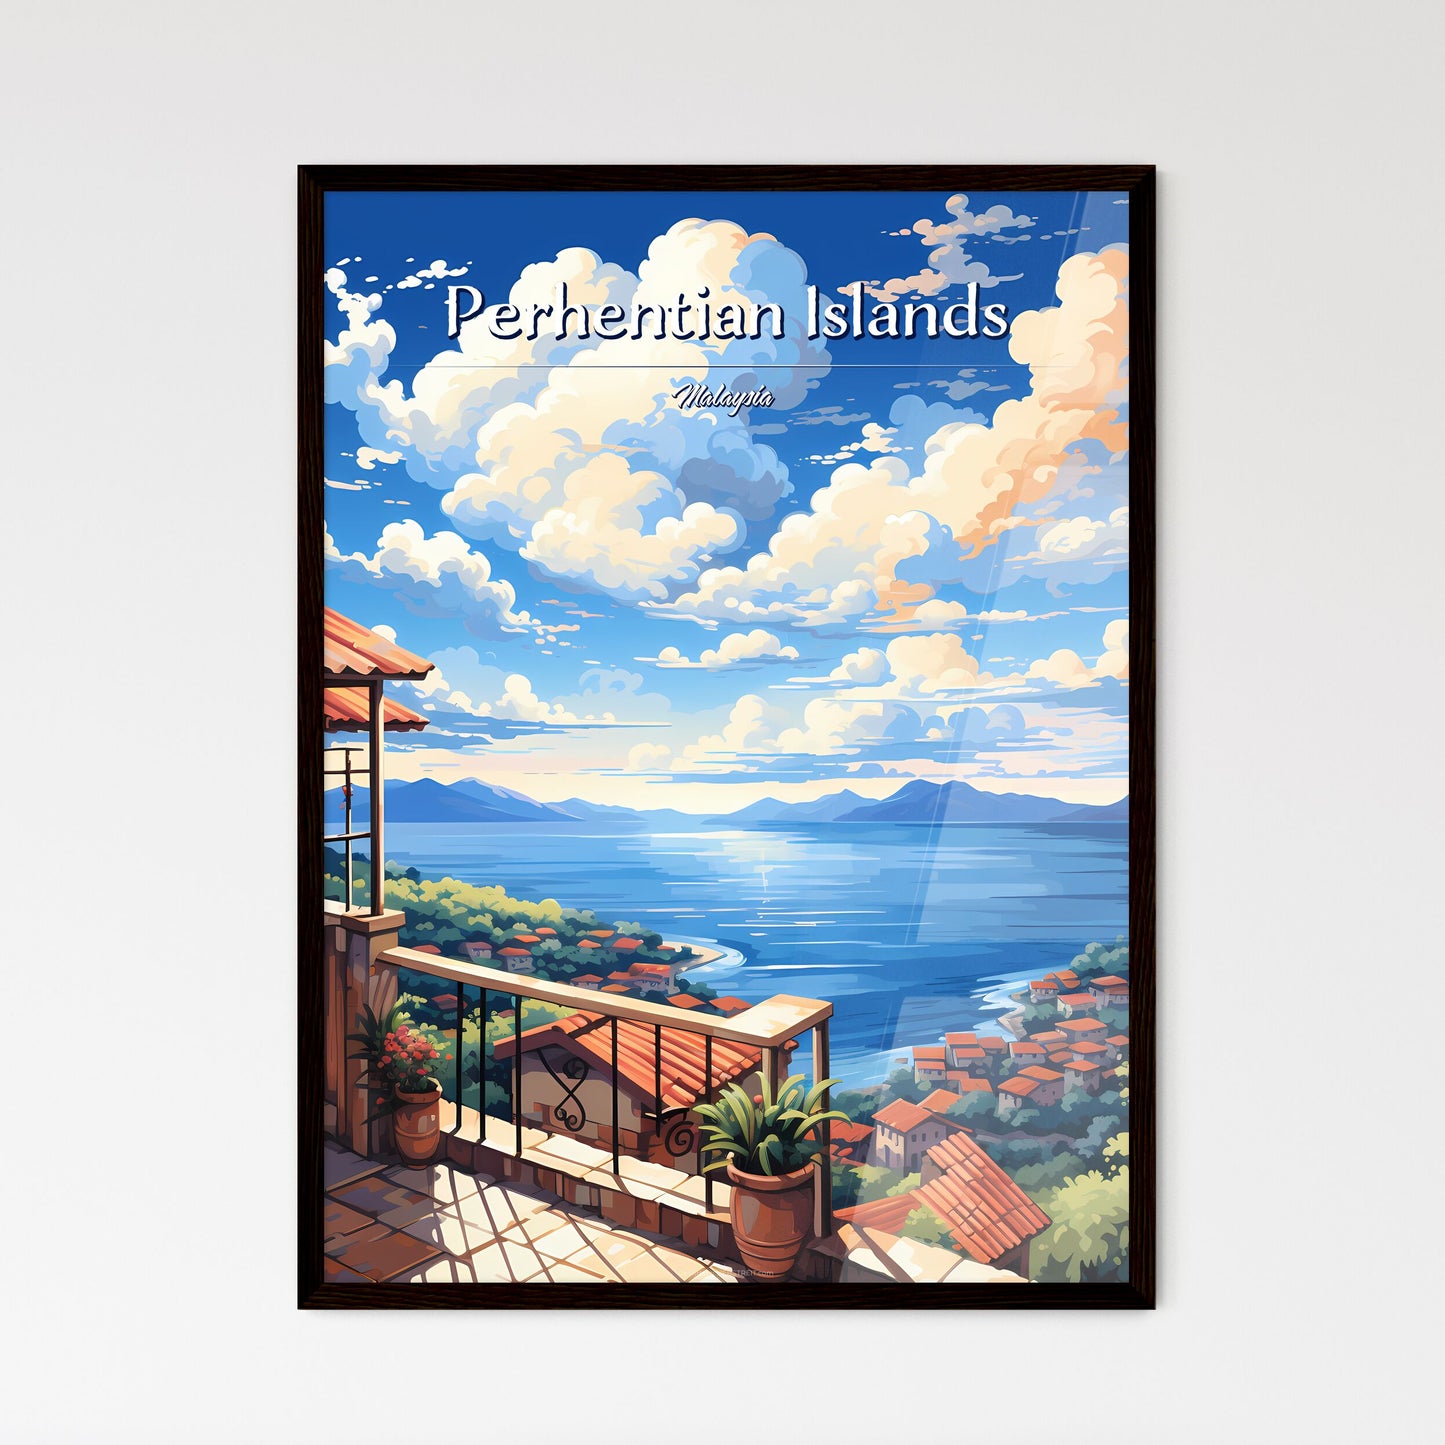 On the roofs of Perhentian Islands, Malaysia - Art print of a painting of a house overlooking a body of water Default Title